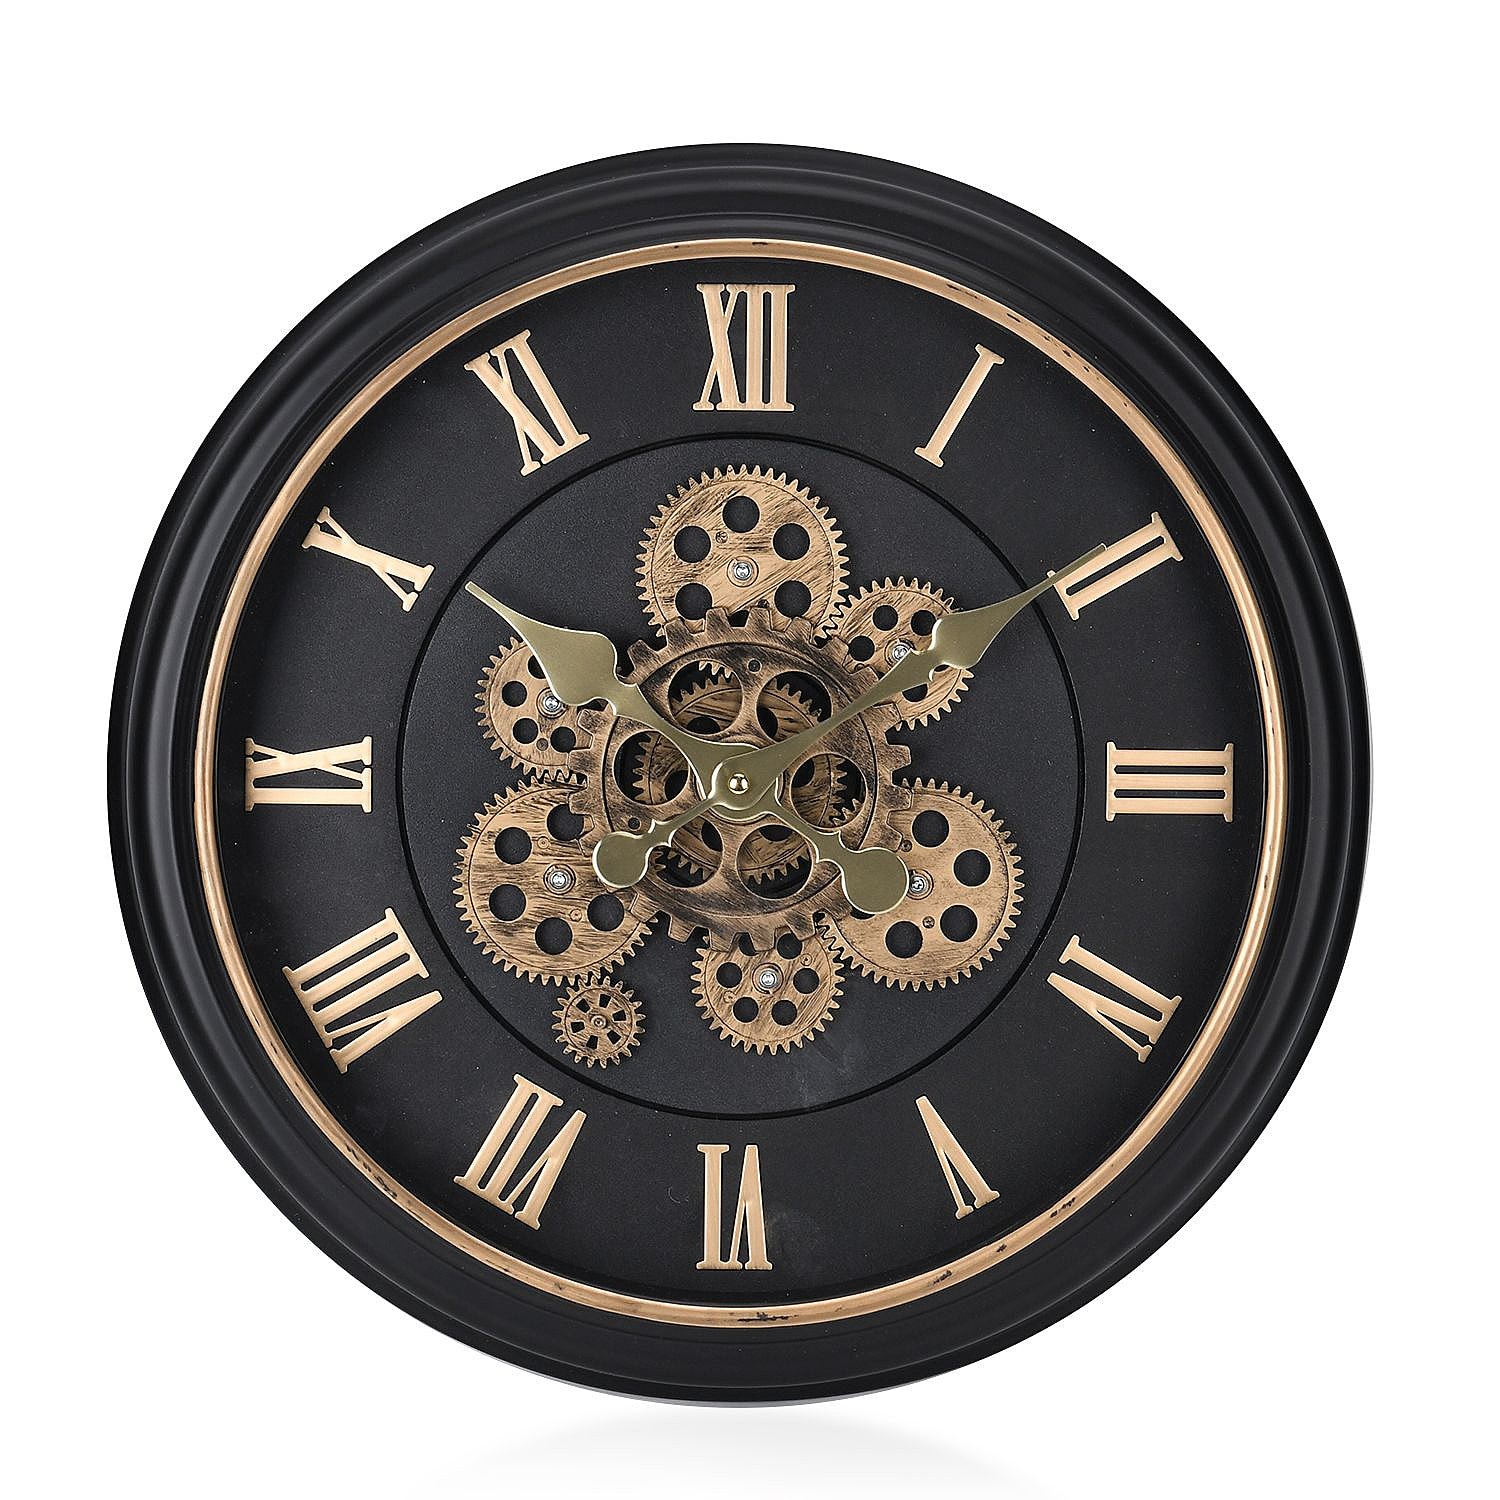 Lsrge Vintage Turning Gears Wall Clock with Large Roman Numerals (Size 45 cm) - Black